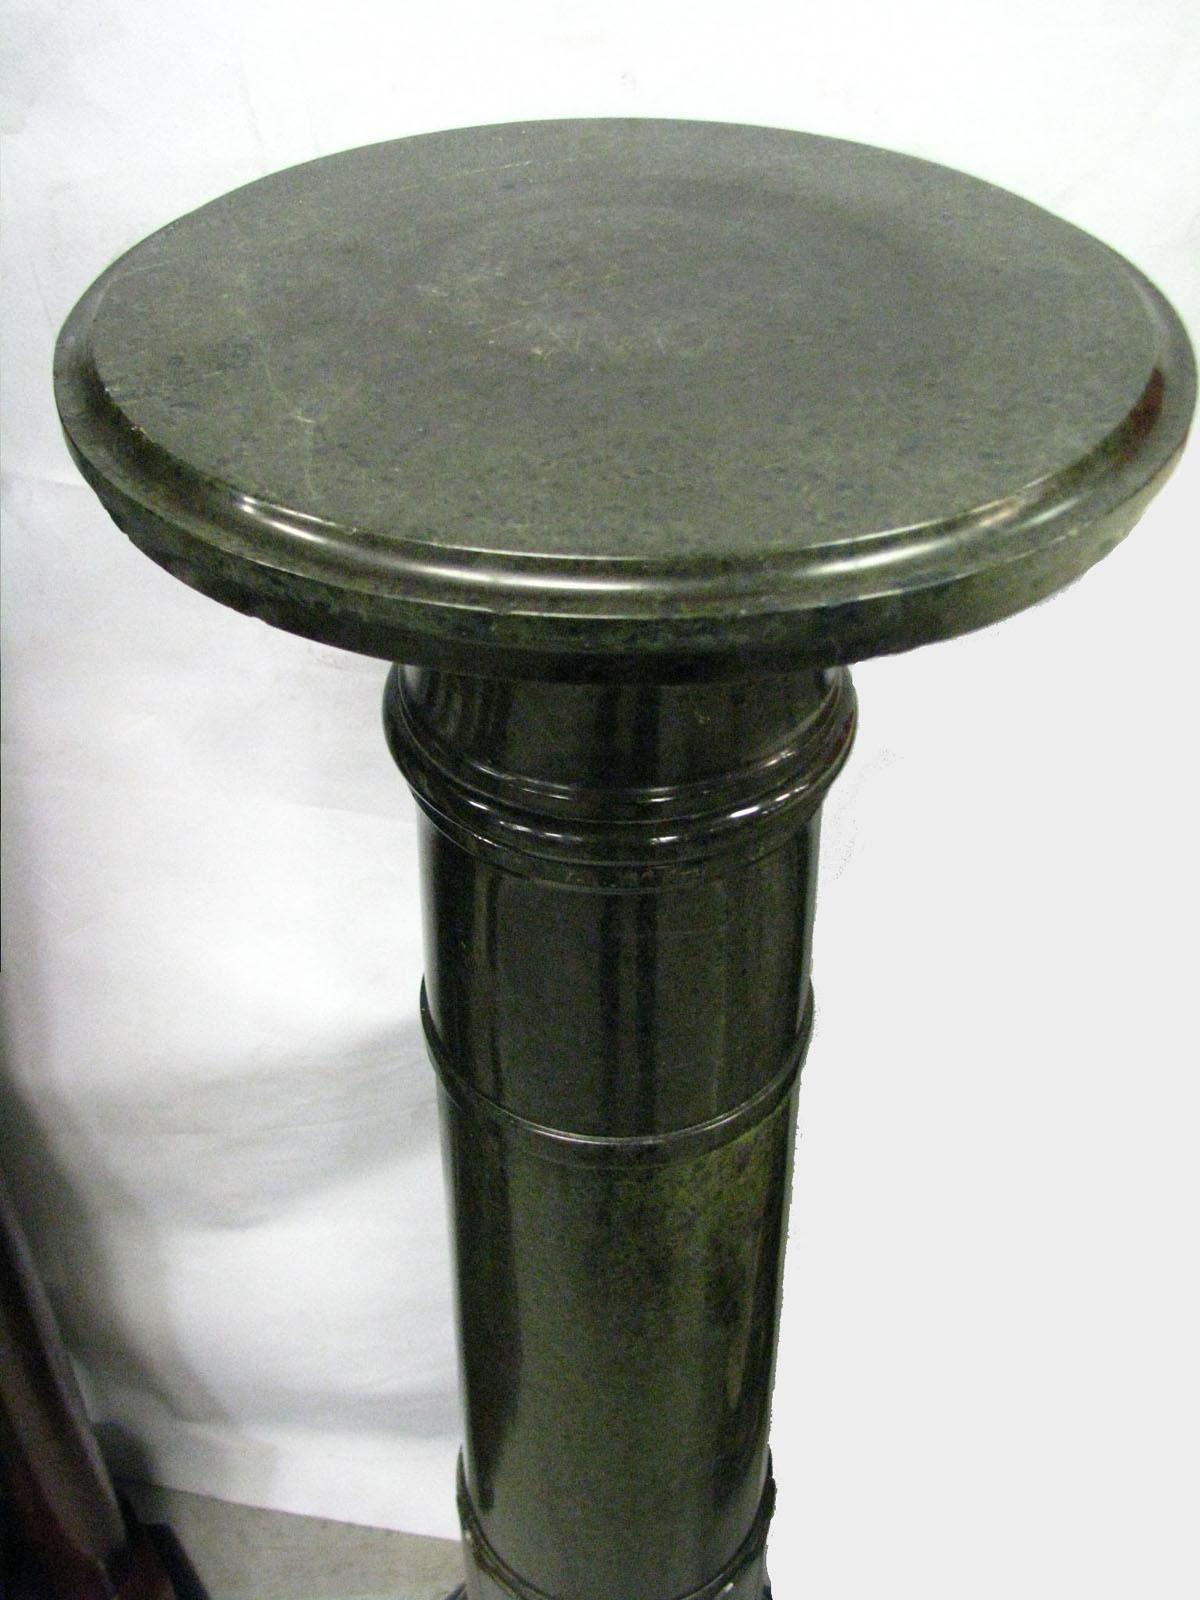 A Classic pedestal, meter high, made of bottle green marble, in the form of a column with a round, mostly smooth shaft, crowned with a round stone top.
Pedestal maintained in a classicist spirit.
Despite the relatively simple form - very